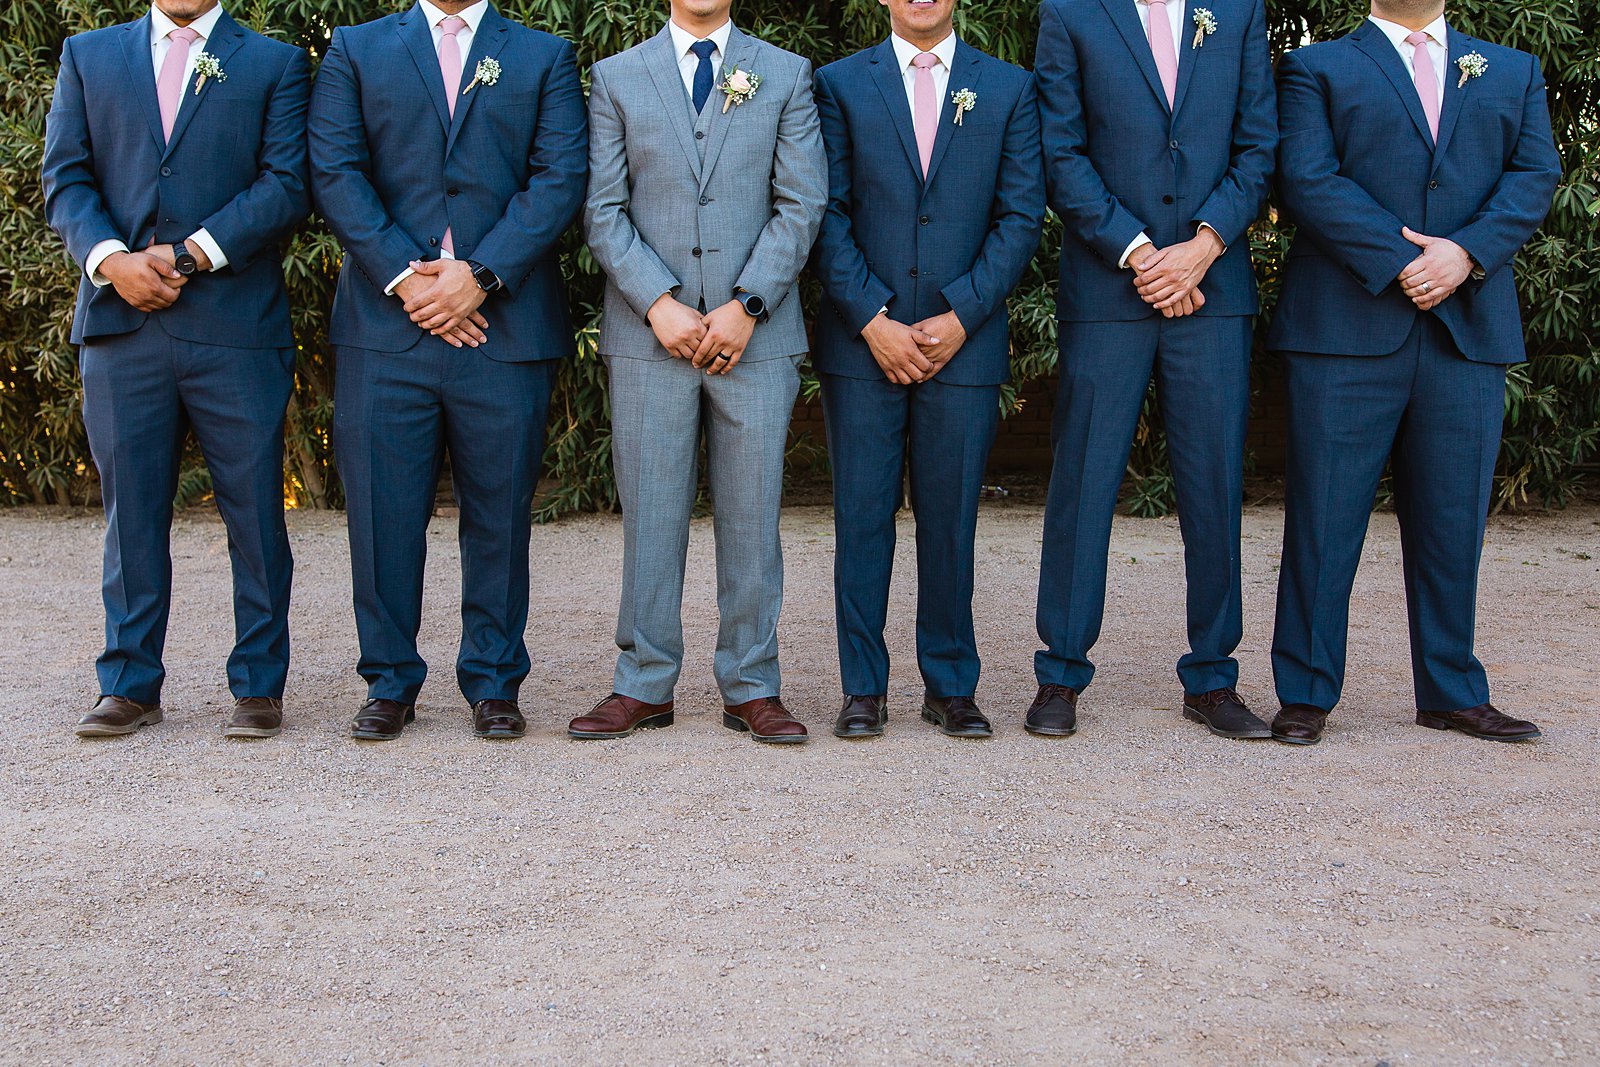 Groom and groomsmen outfit details by PMA Photography.